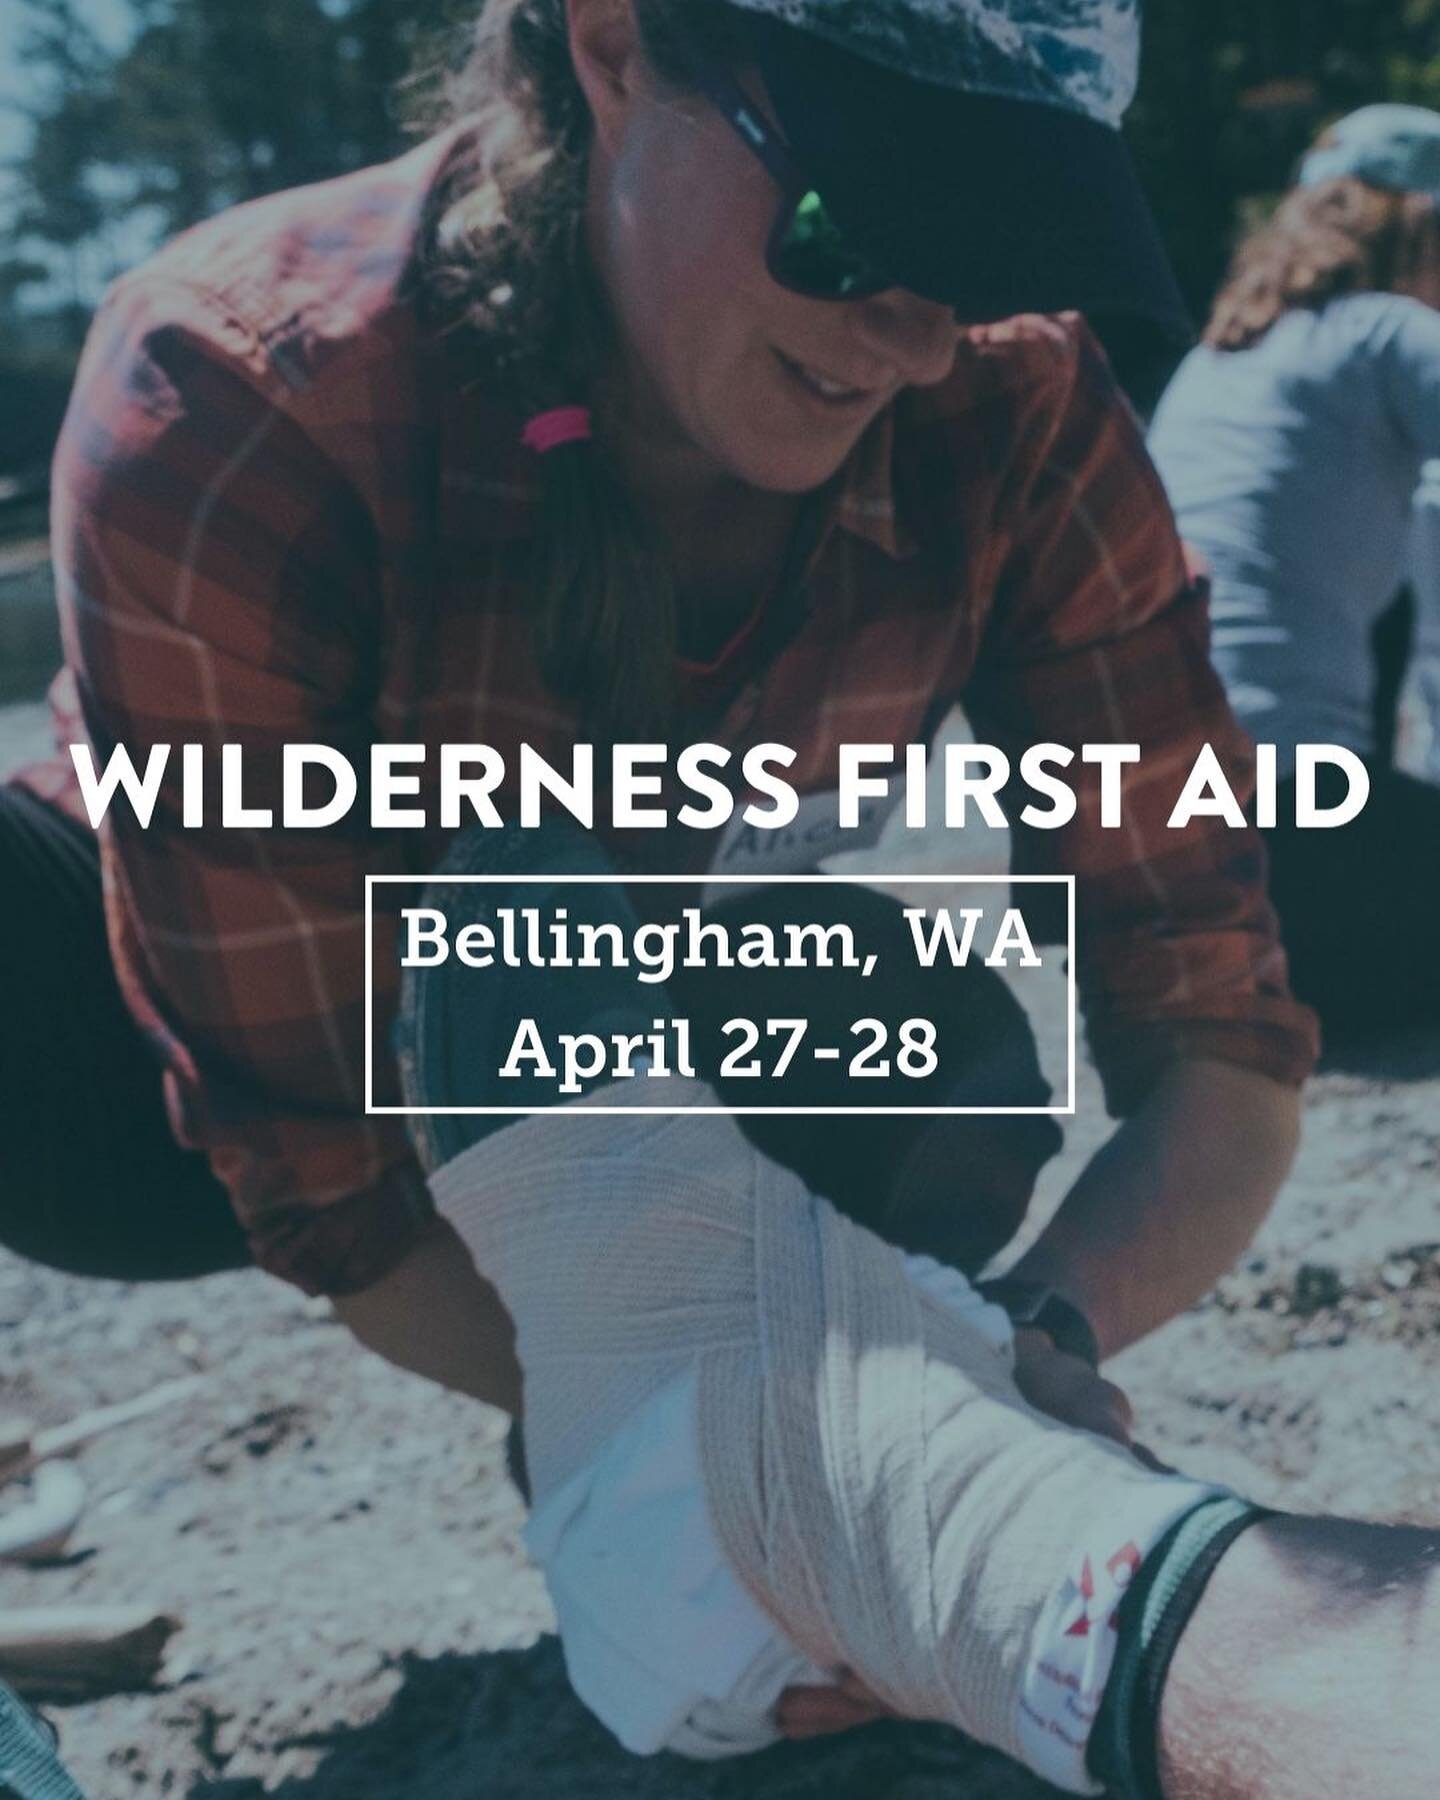 We&rsquo;re delighted to be partnering on this Wilderness First Aid program with one of our favorite local organizations, @letsshiftgears. This all-women training will take place at Larrabee State Park in April. Learn more &amp; snag your spot at htt